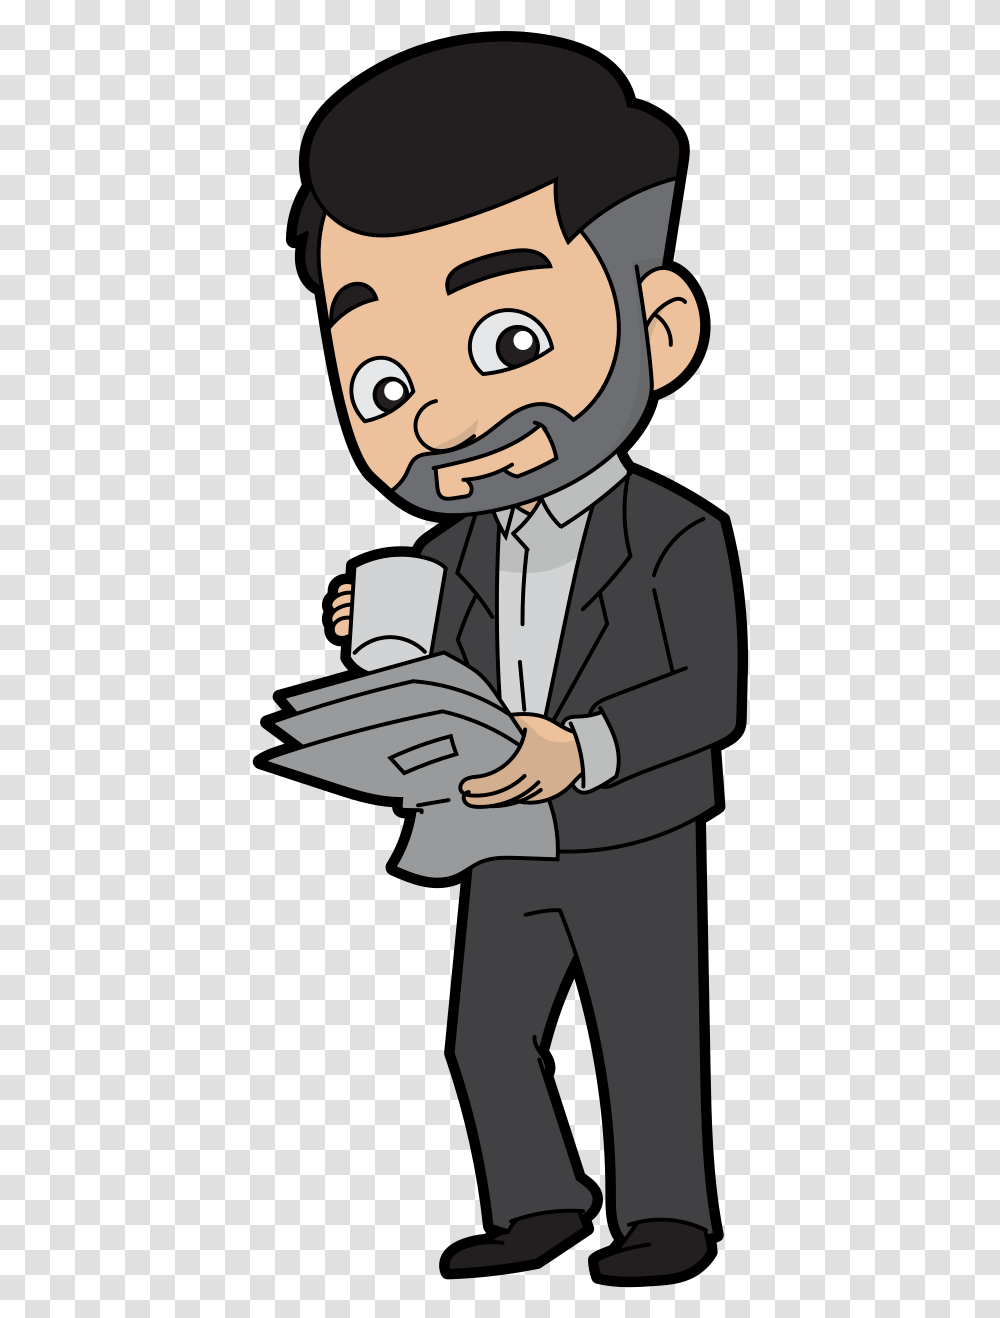 Drinking Coffee Cartoon Download Hand Drink Coffee Cartoon, Person, Human, Waiter, Performer Transparent Png